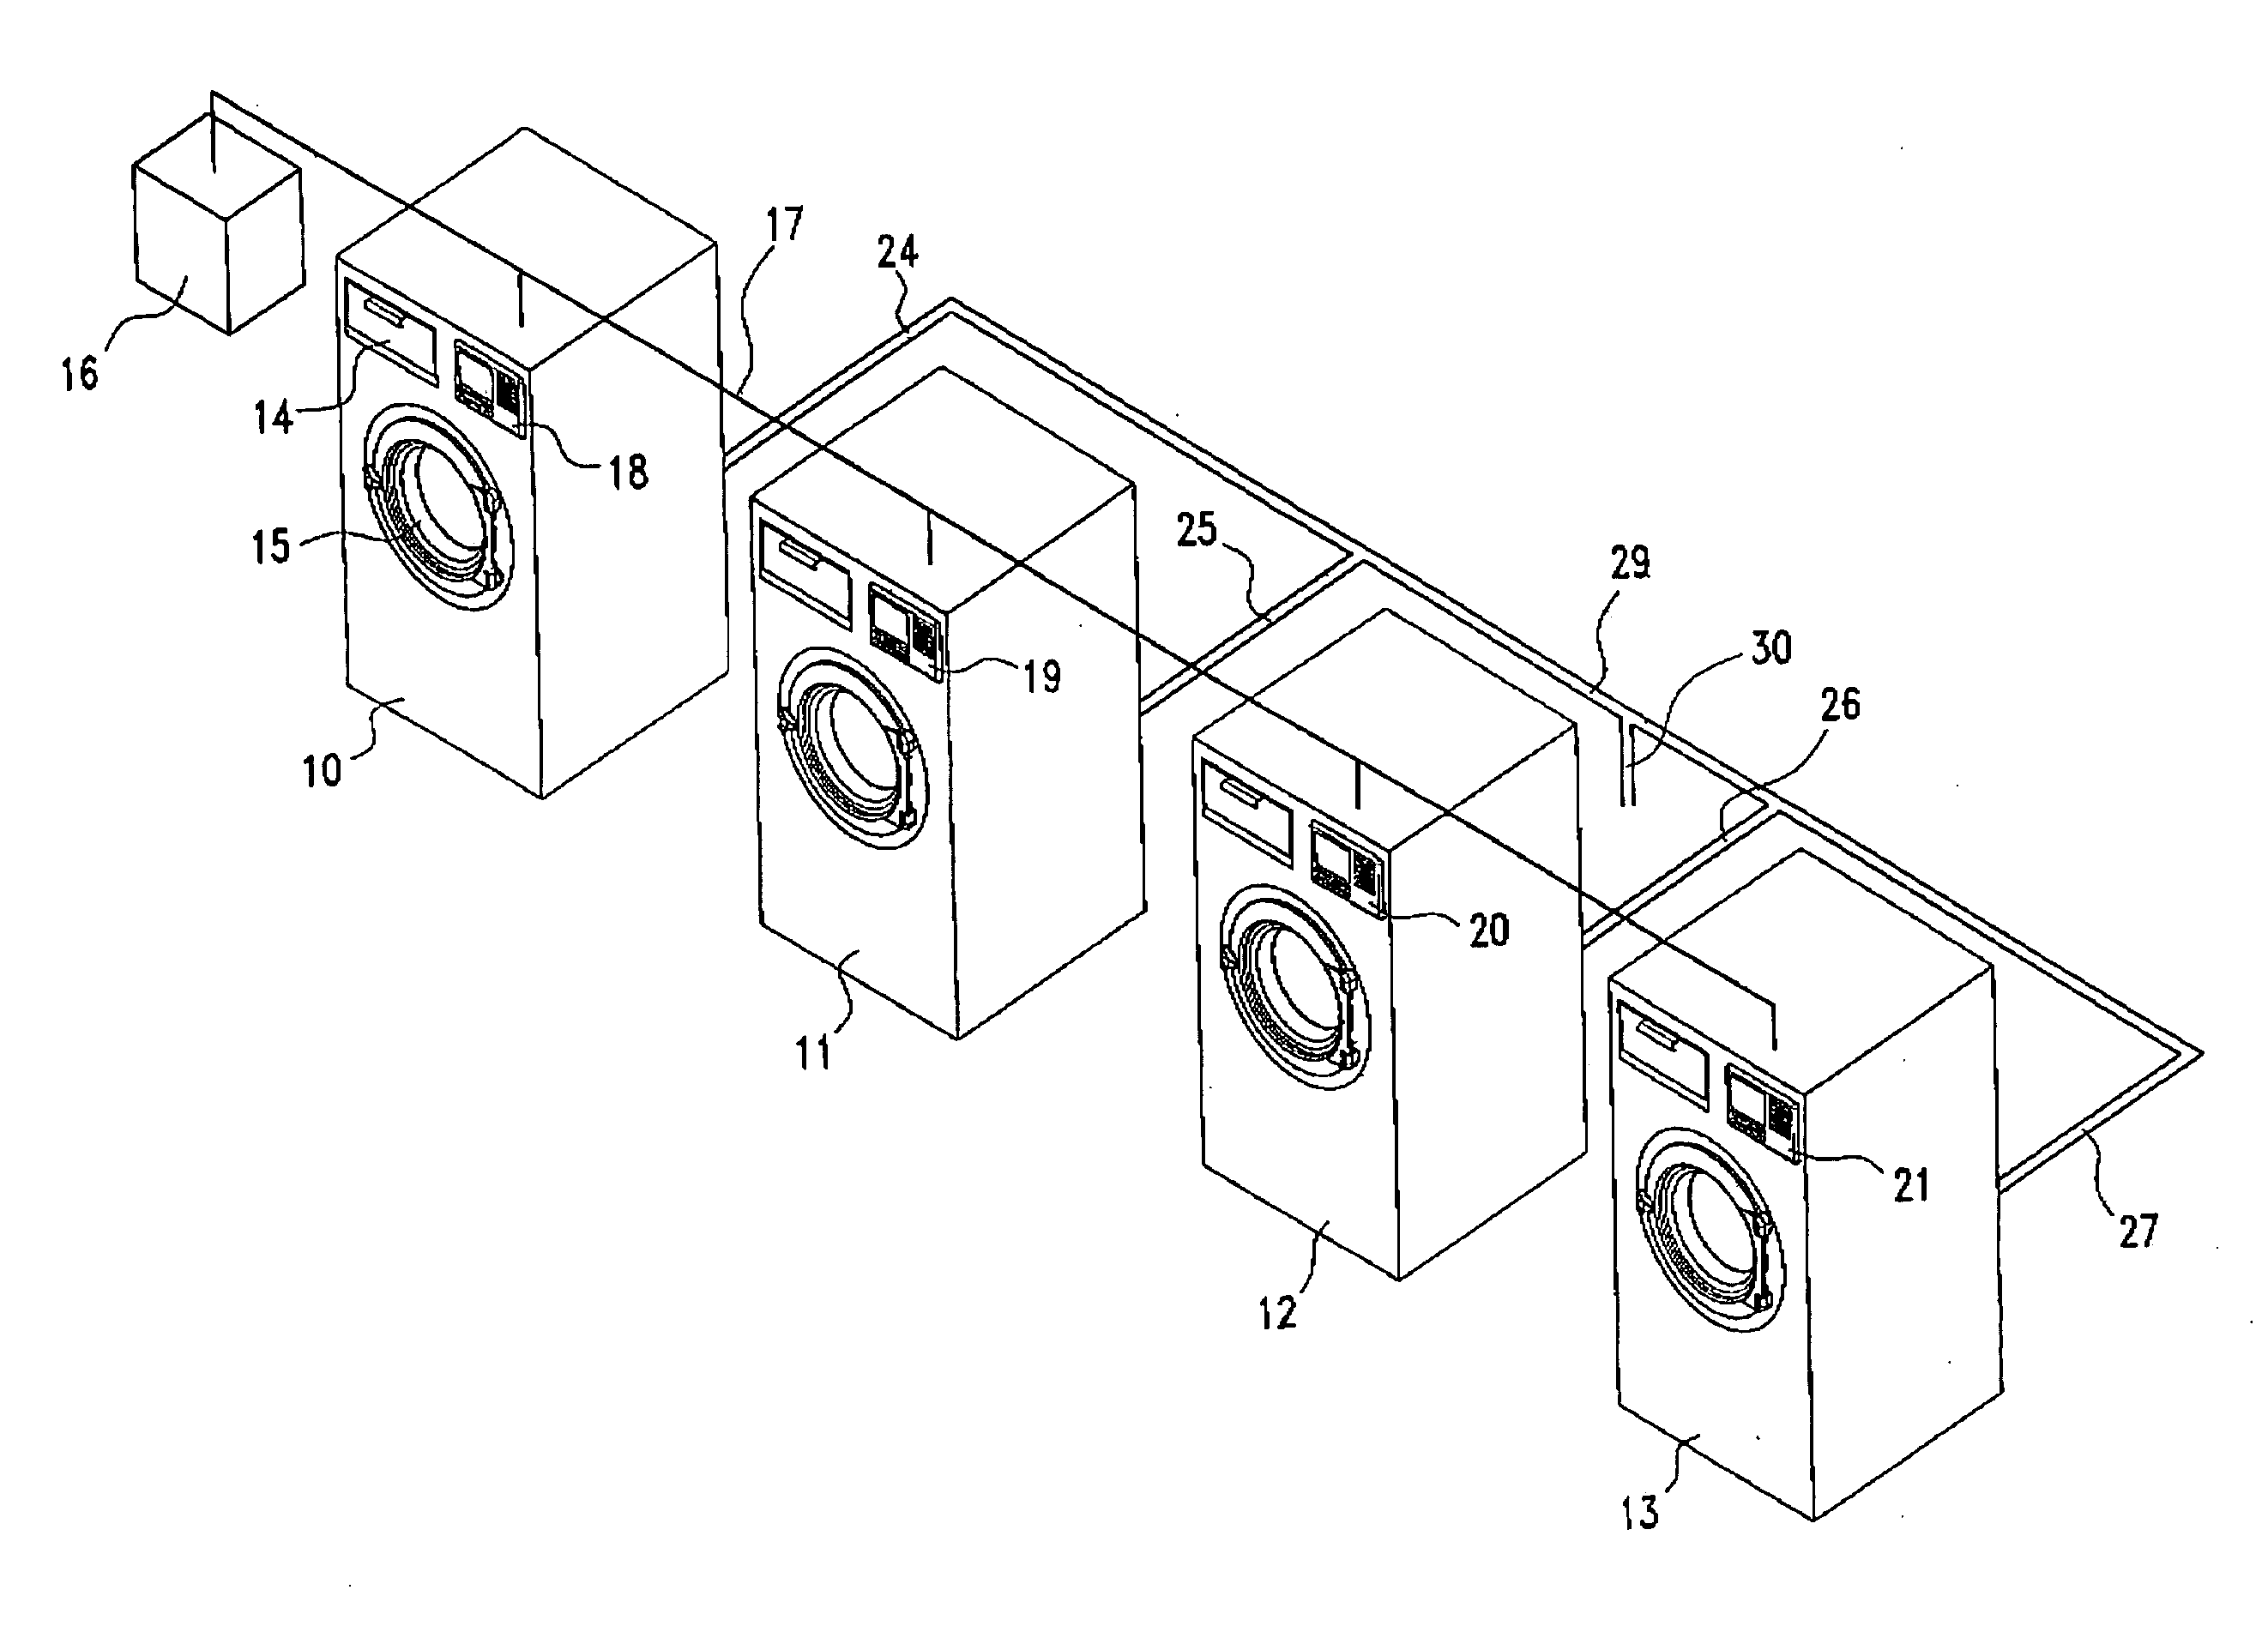 Network and protocol for controlling washing and drying machines which share common utilities